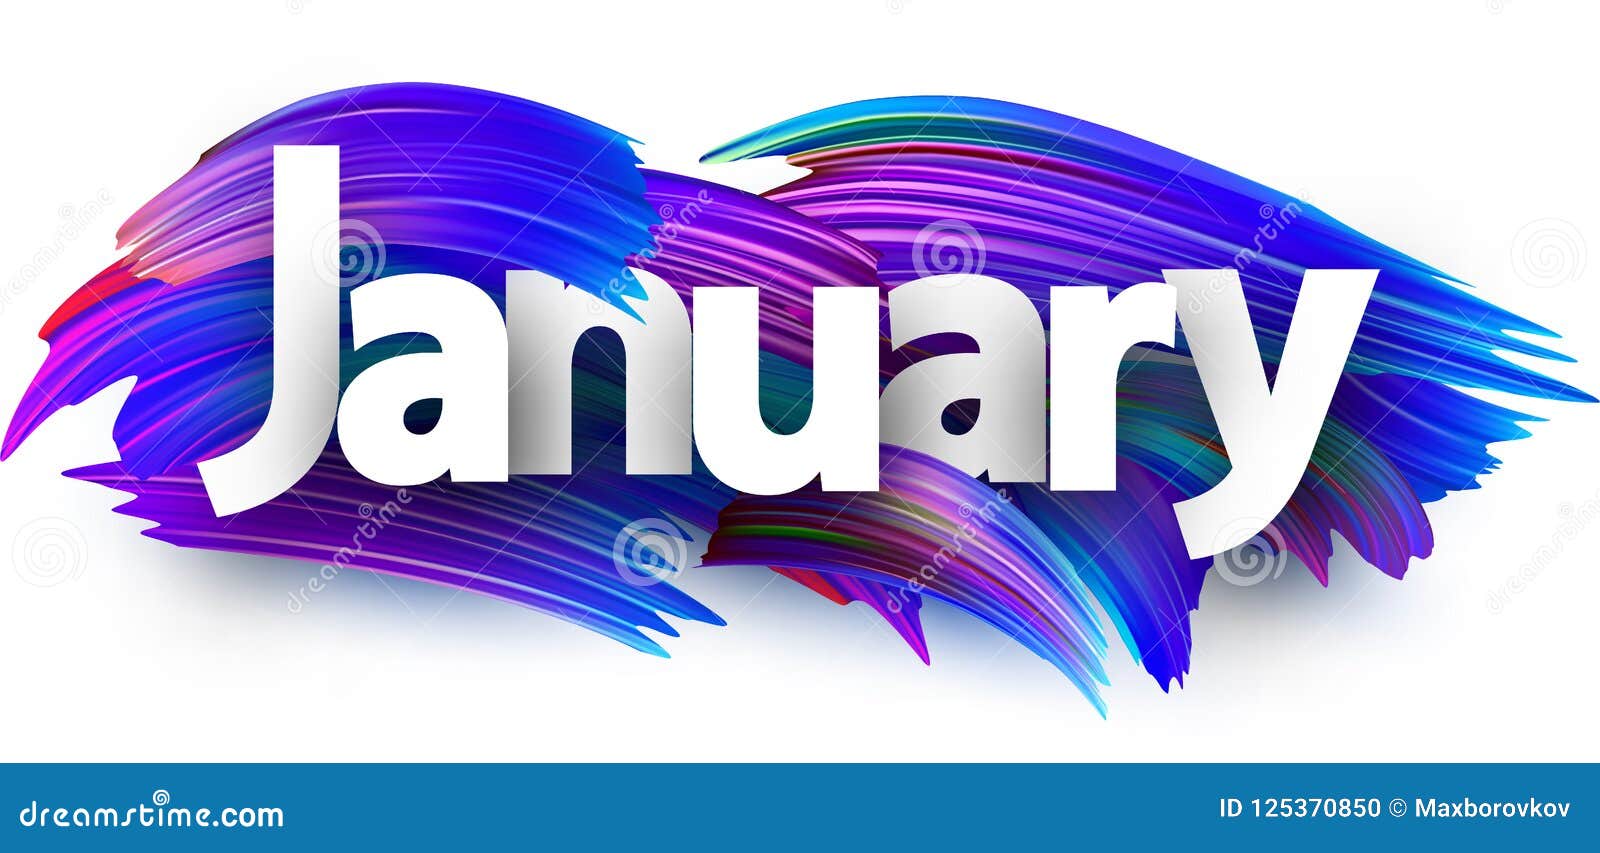 january banner with blue brush strokes.